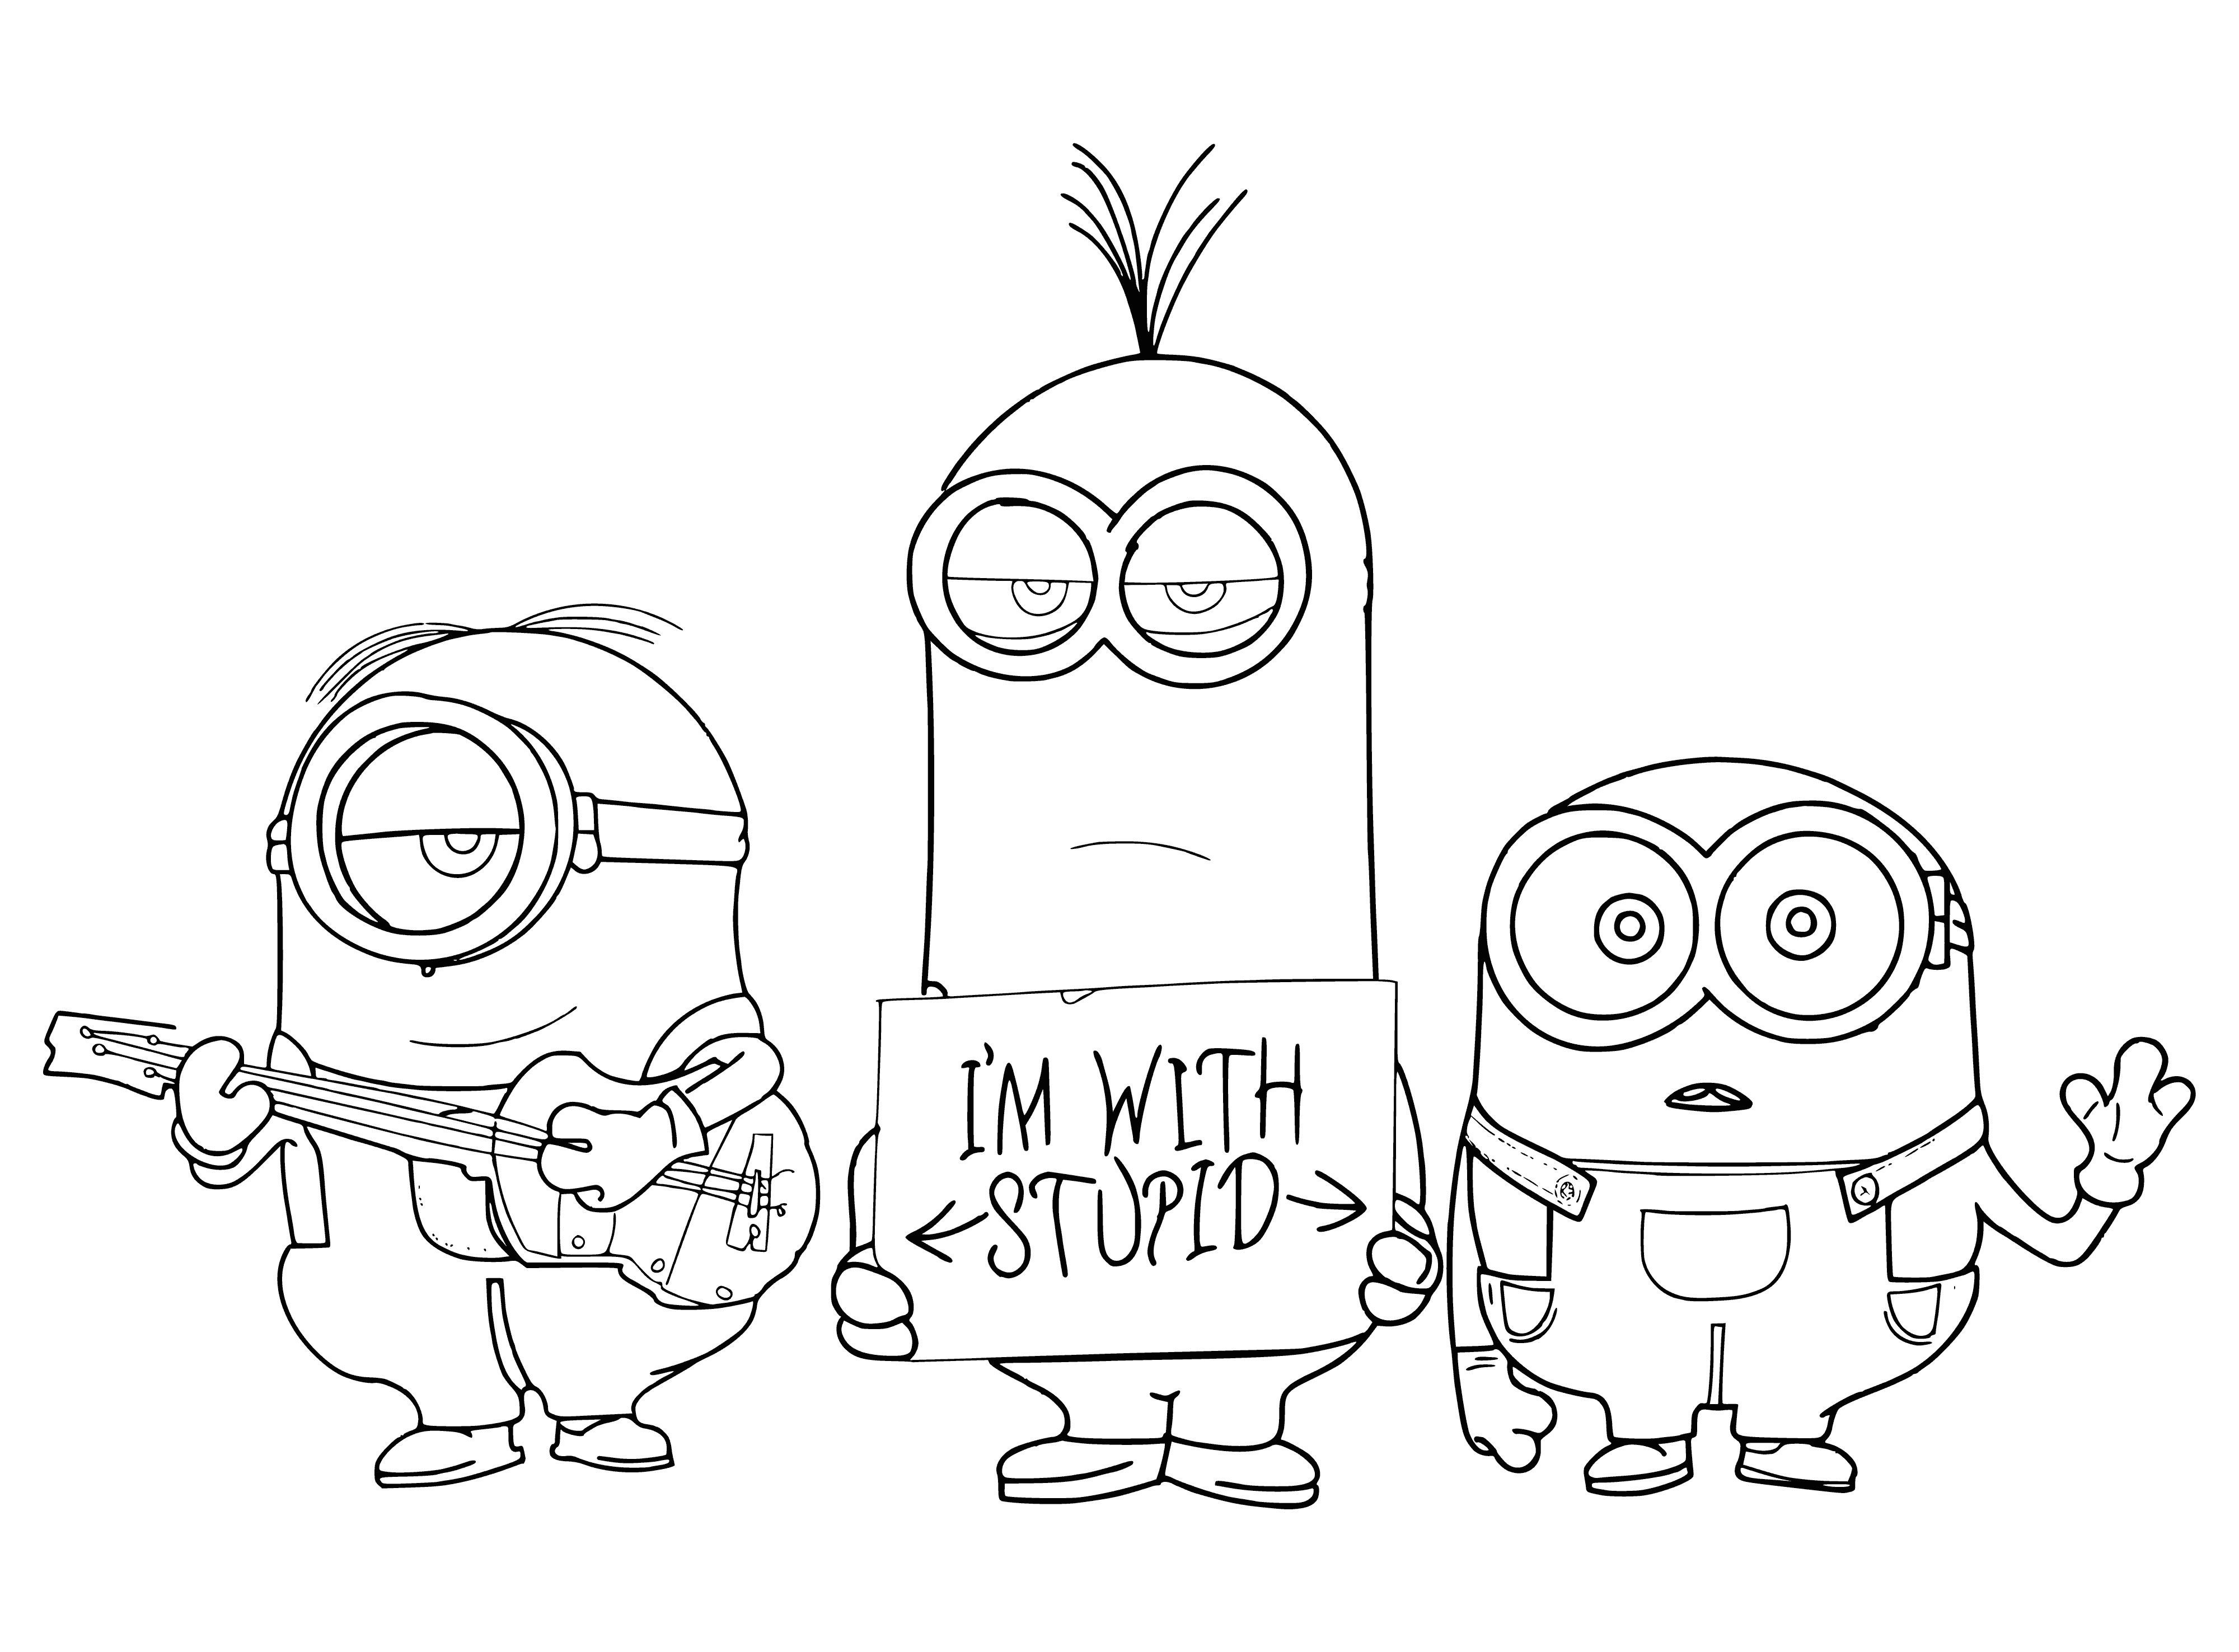 coloring page: Minion in black top & jeans holding remote has yellow skin & one blue eye; slicked back hair. #minions #coloringpages